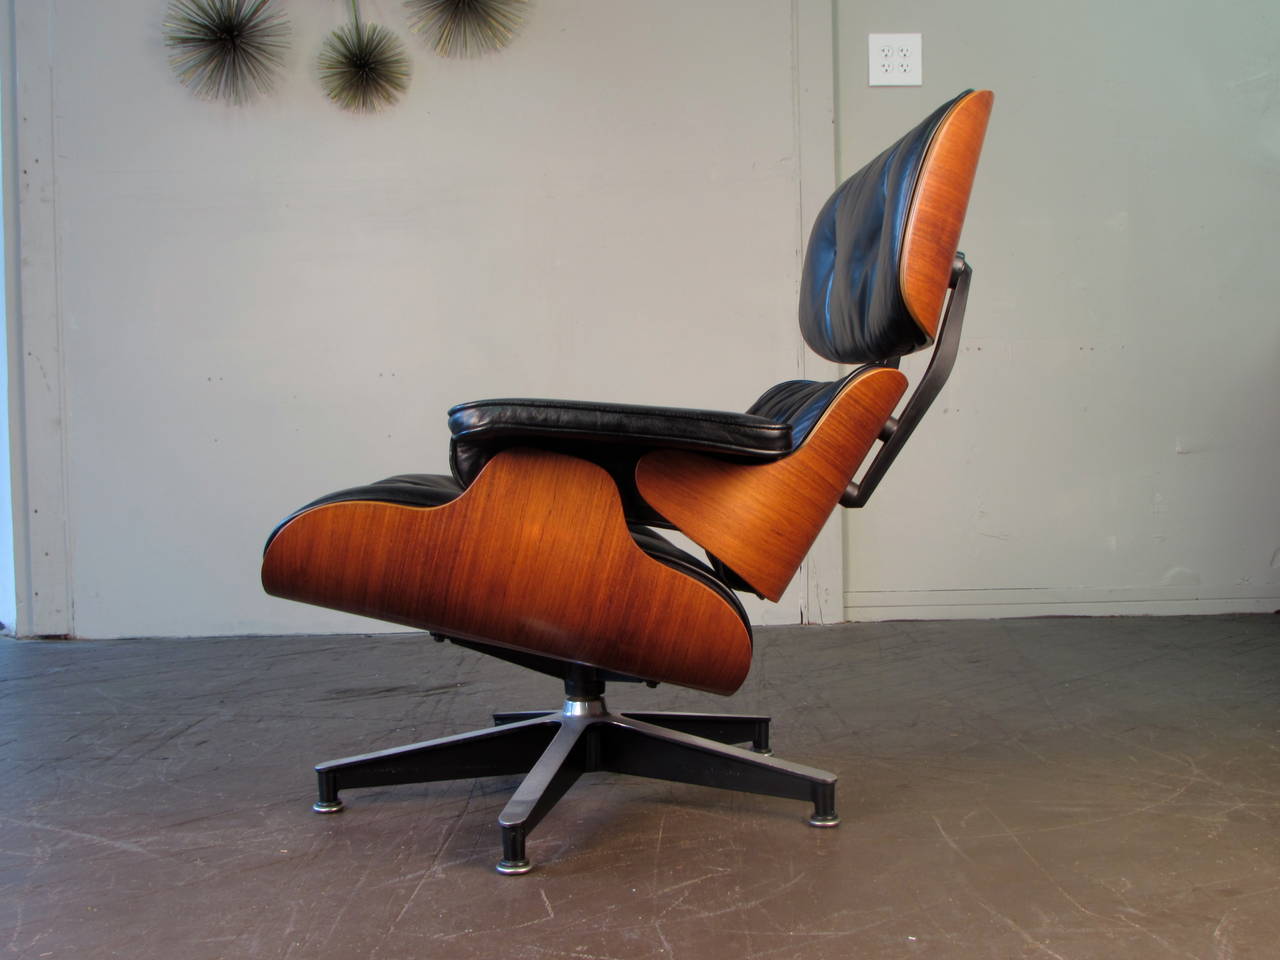 Iconic 670 lounge chair by Charles and Ray Eames for Herman Miller. This chair is in black leather with a lightly grained rosewood veneer. Condition is excellent.

We offer free delivery to NYC and Philadelphia area. Delivery to DC, MD, CT and MA